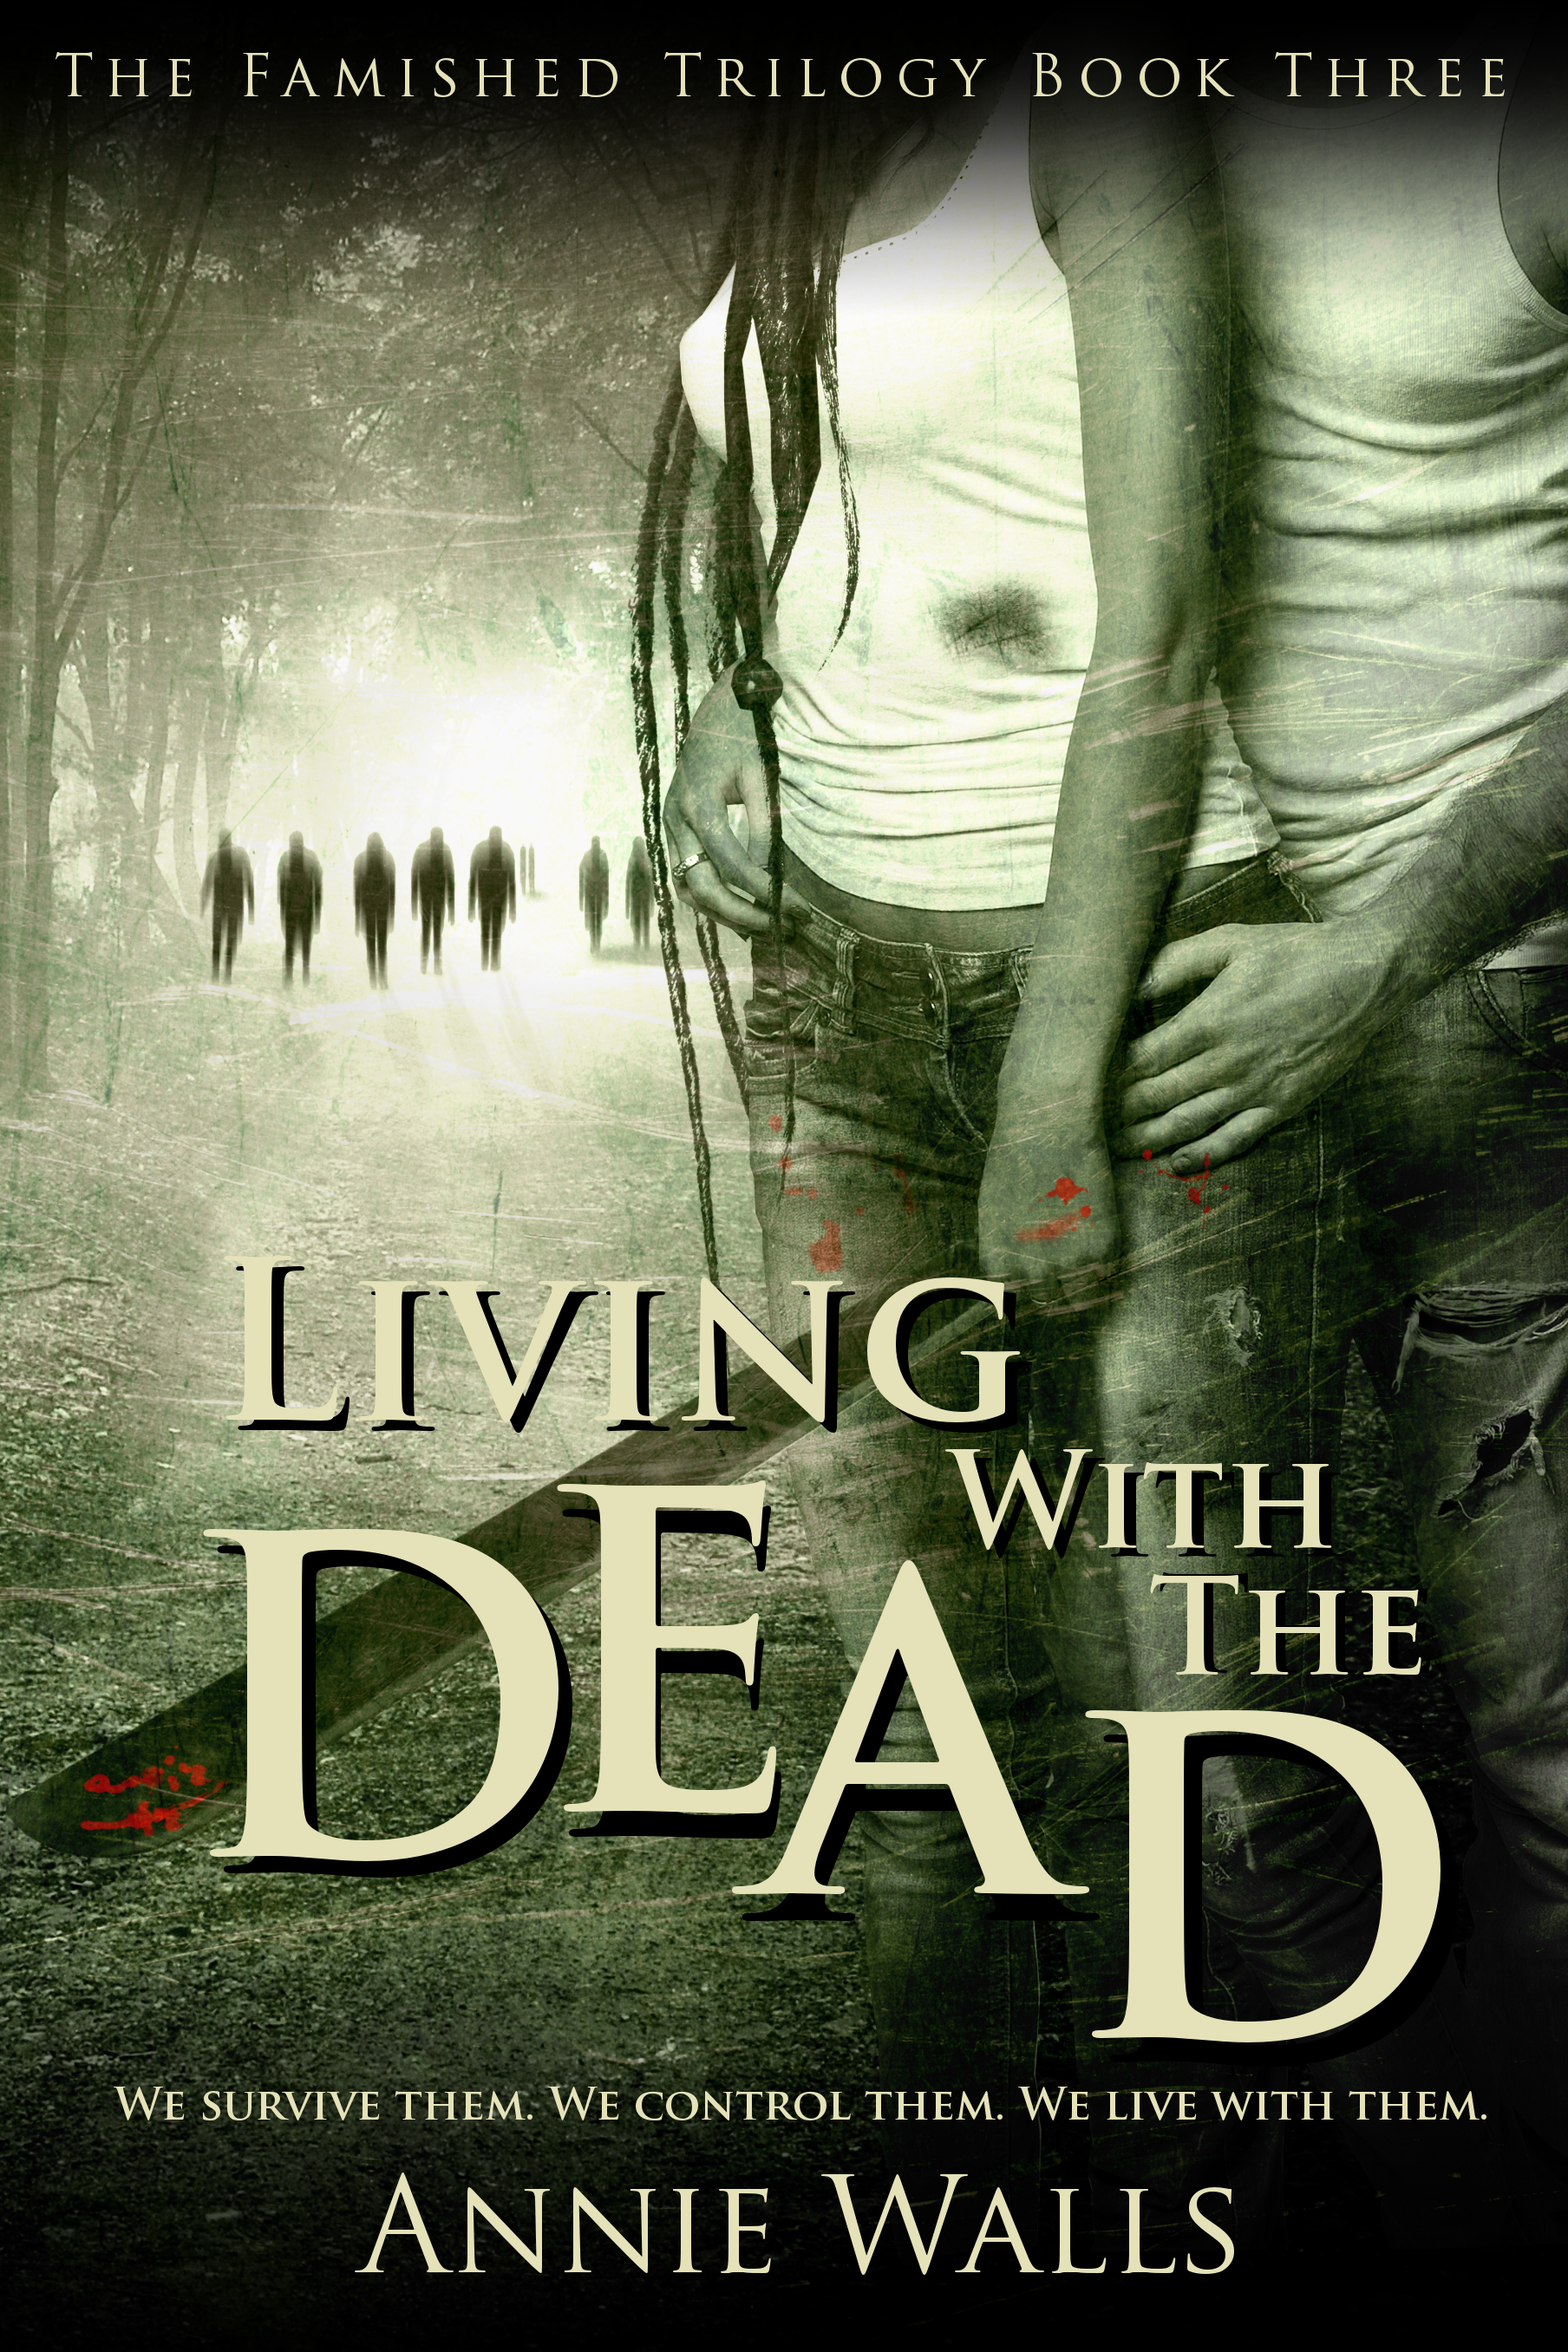 LivingwiththeDead